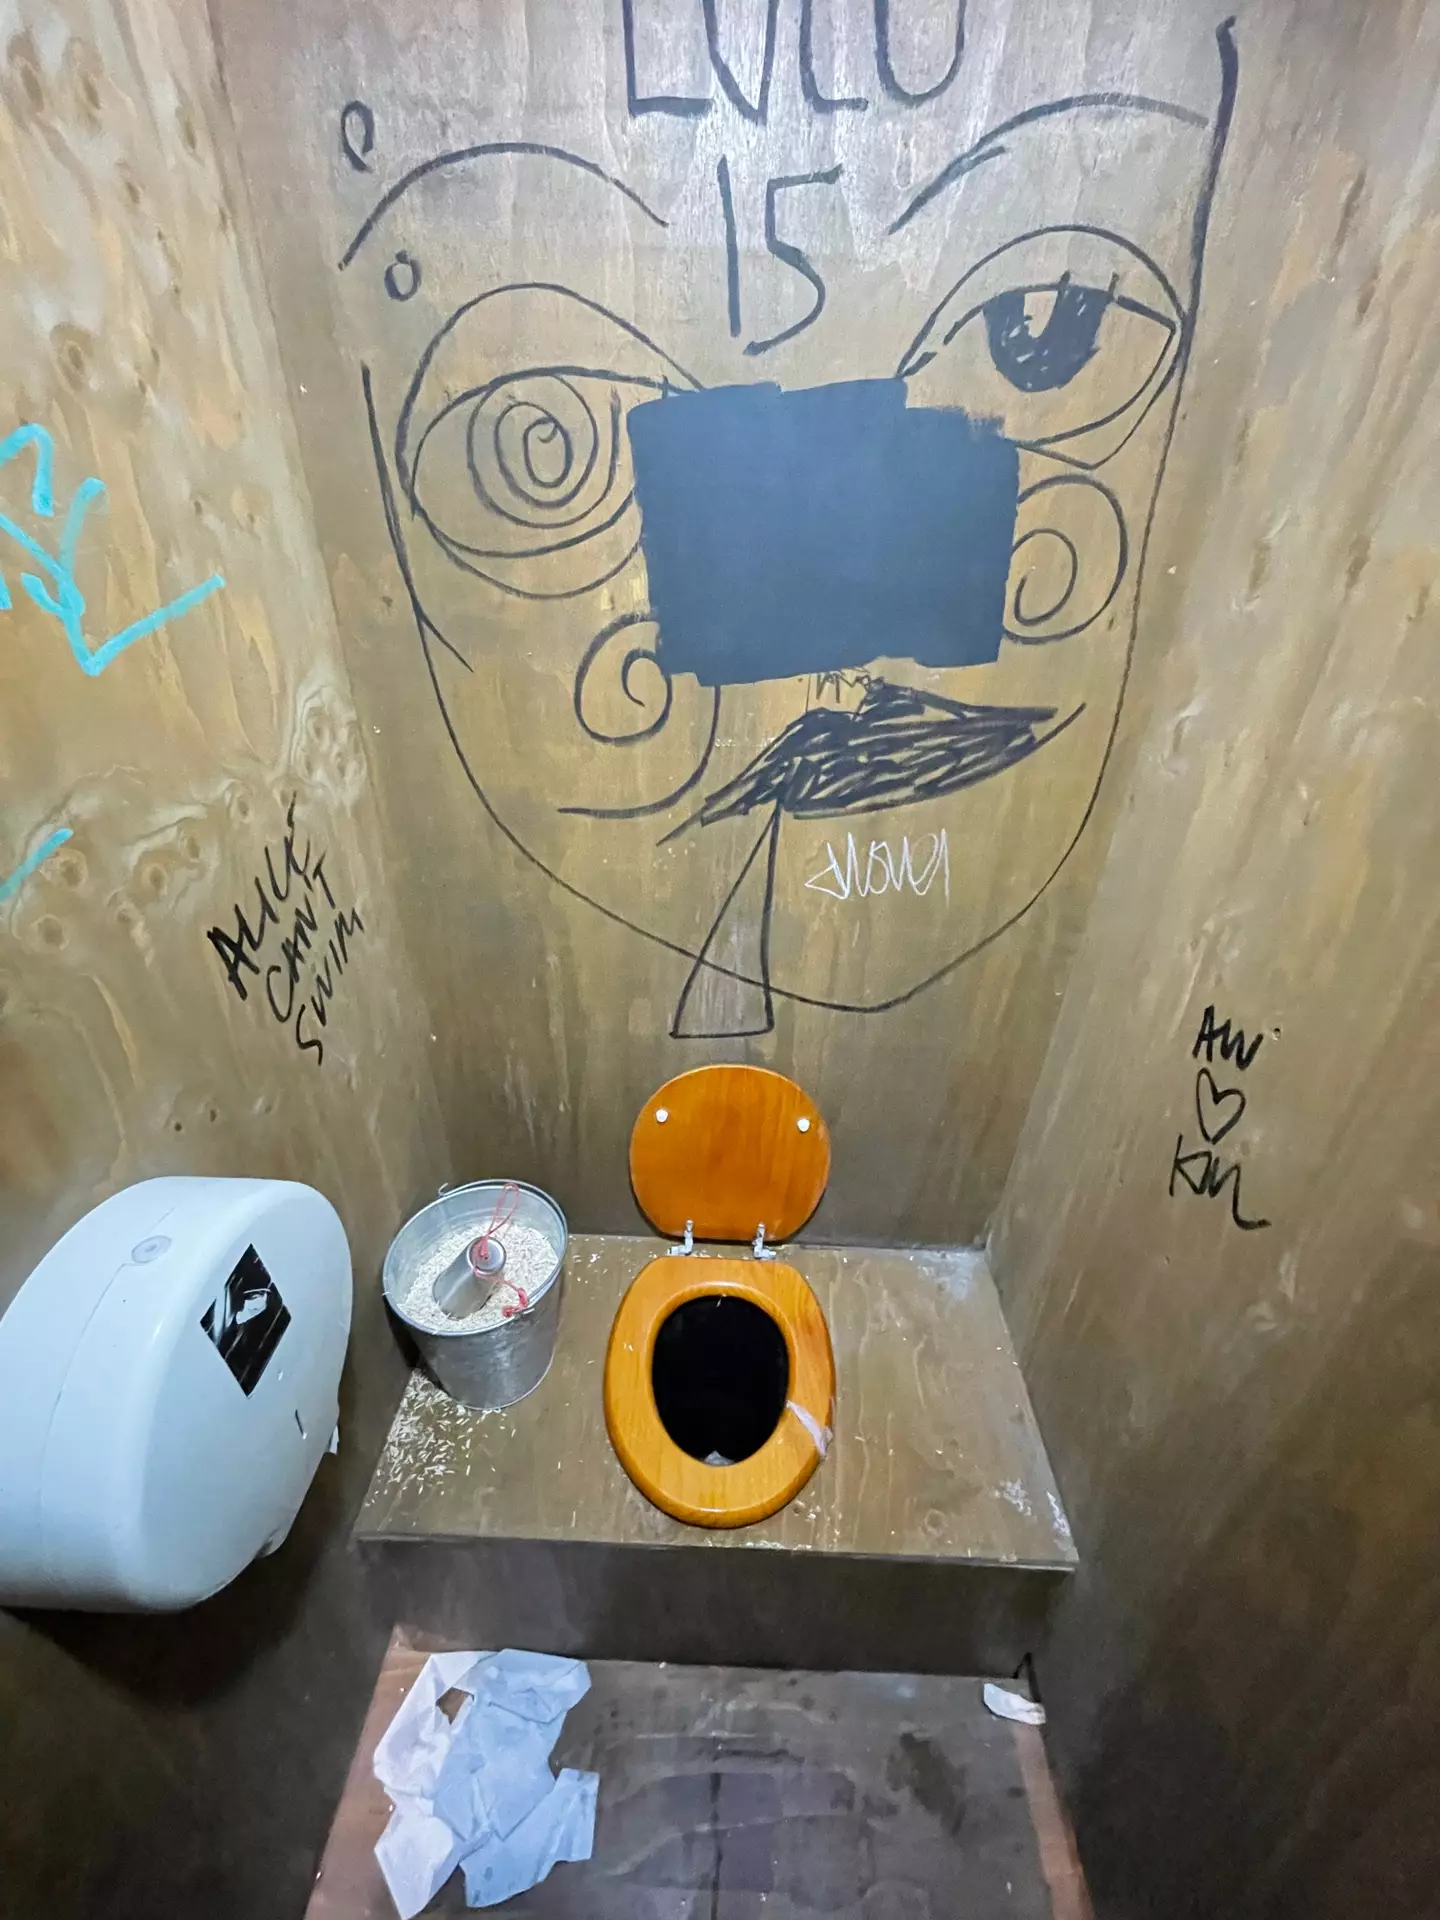 A bar in Peckham has swapped their flushing toilets for sawdust.